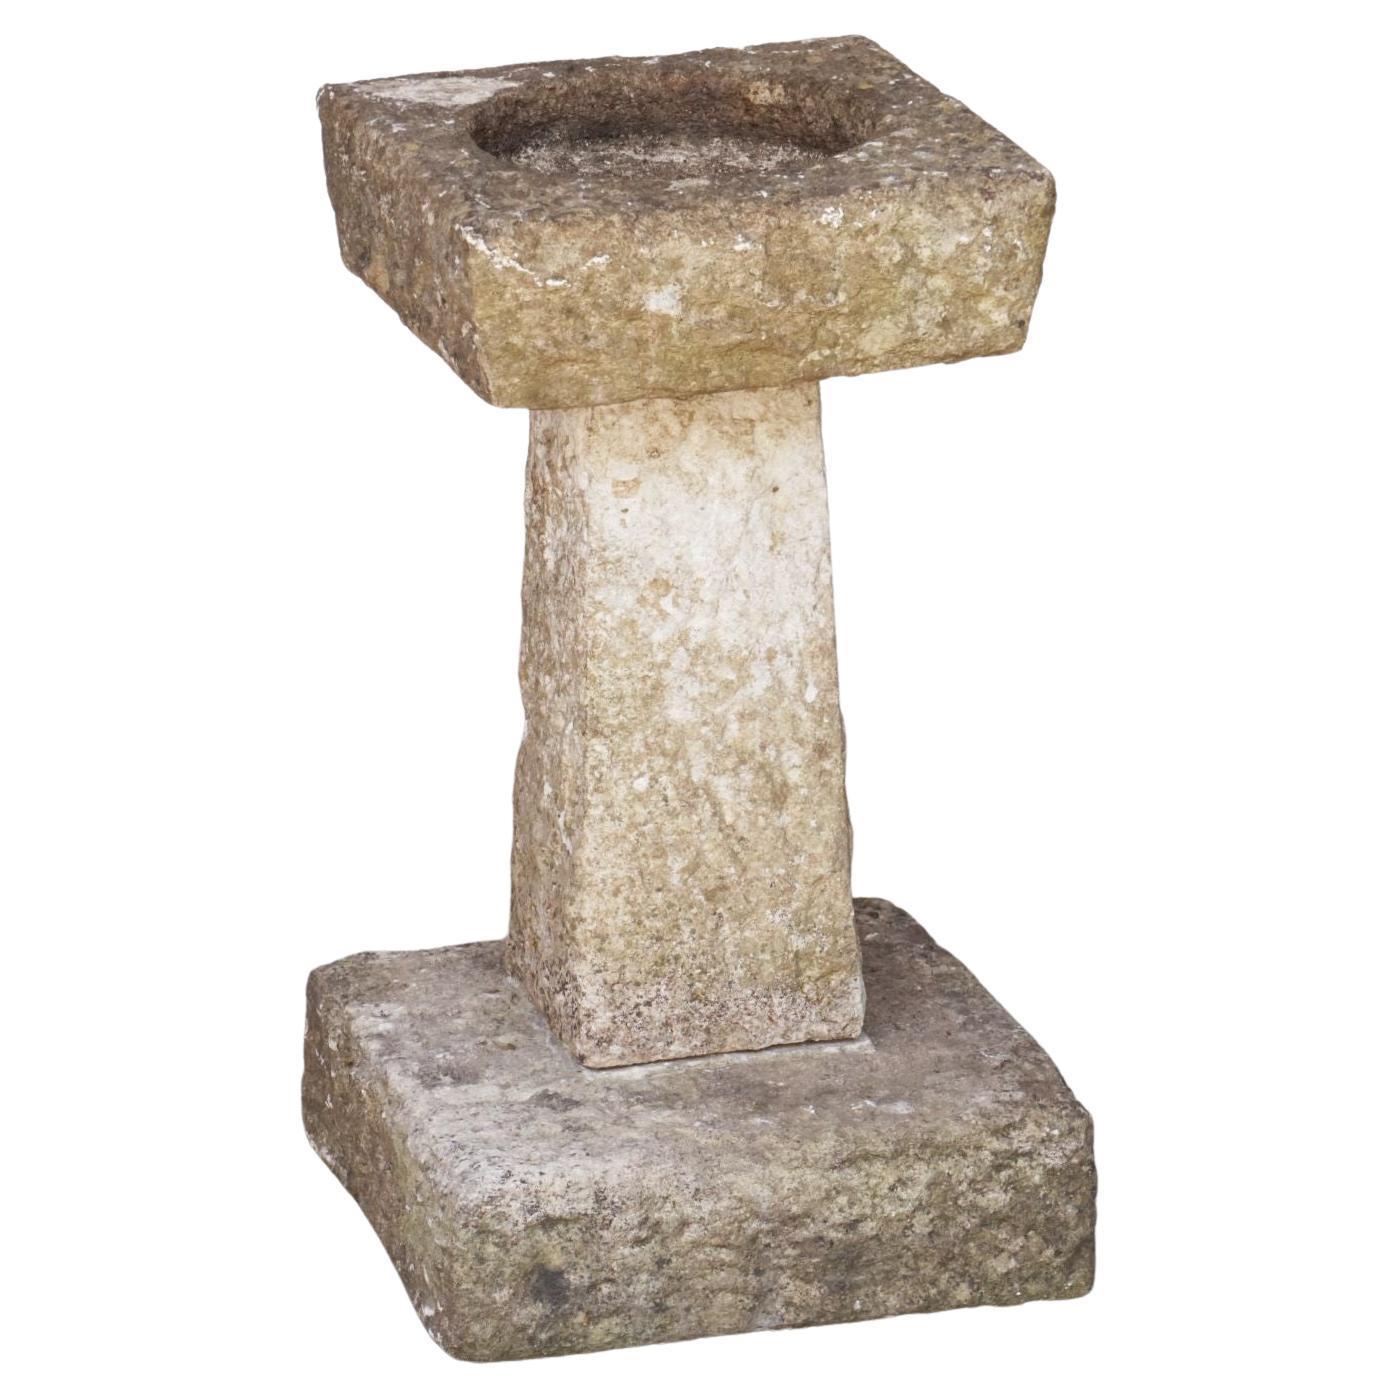 English Garden Square Bird Bath of Carved Purbeck Stone